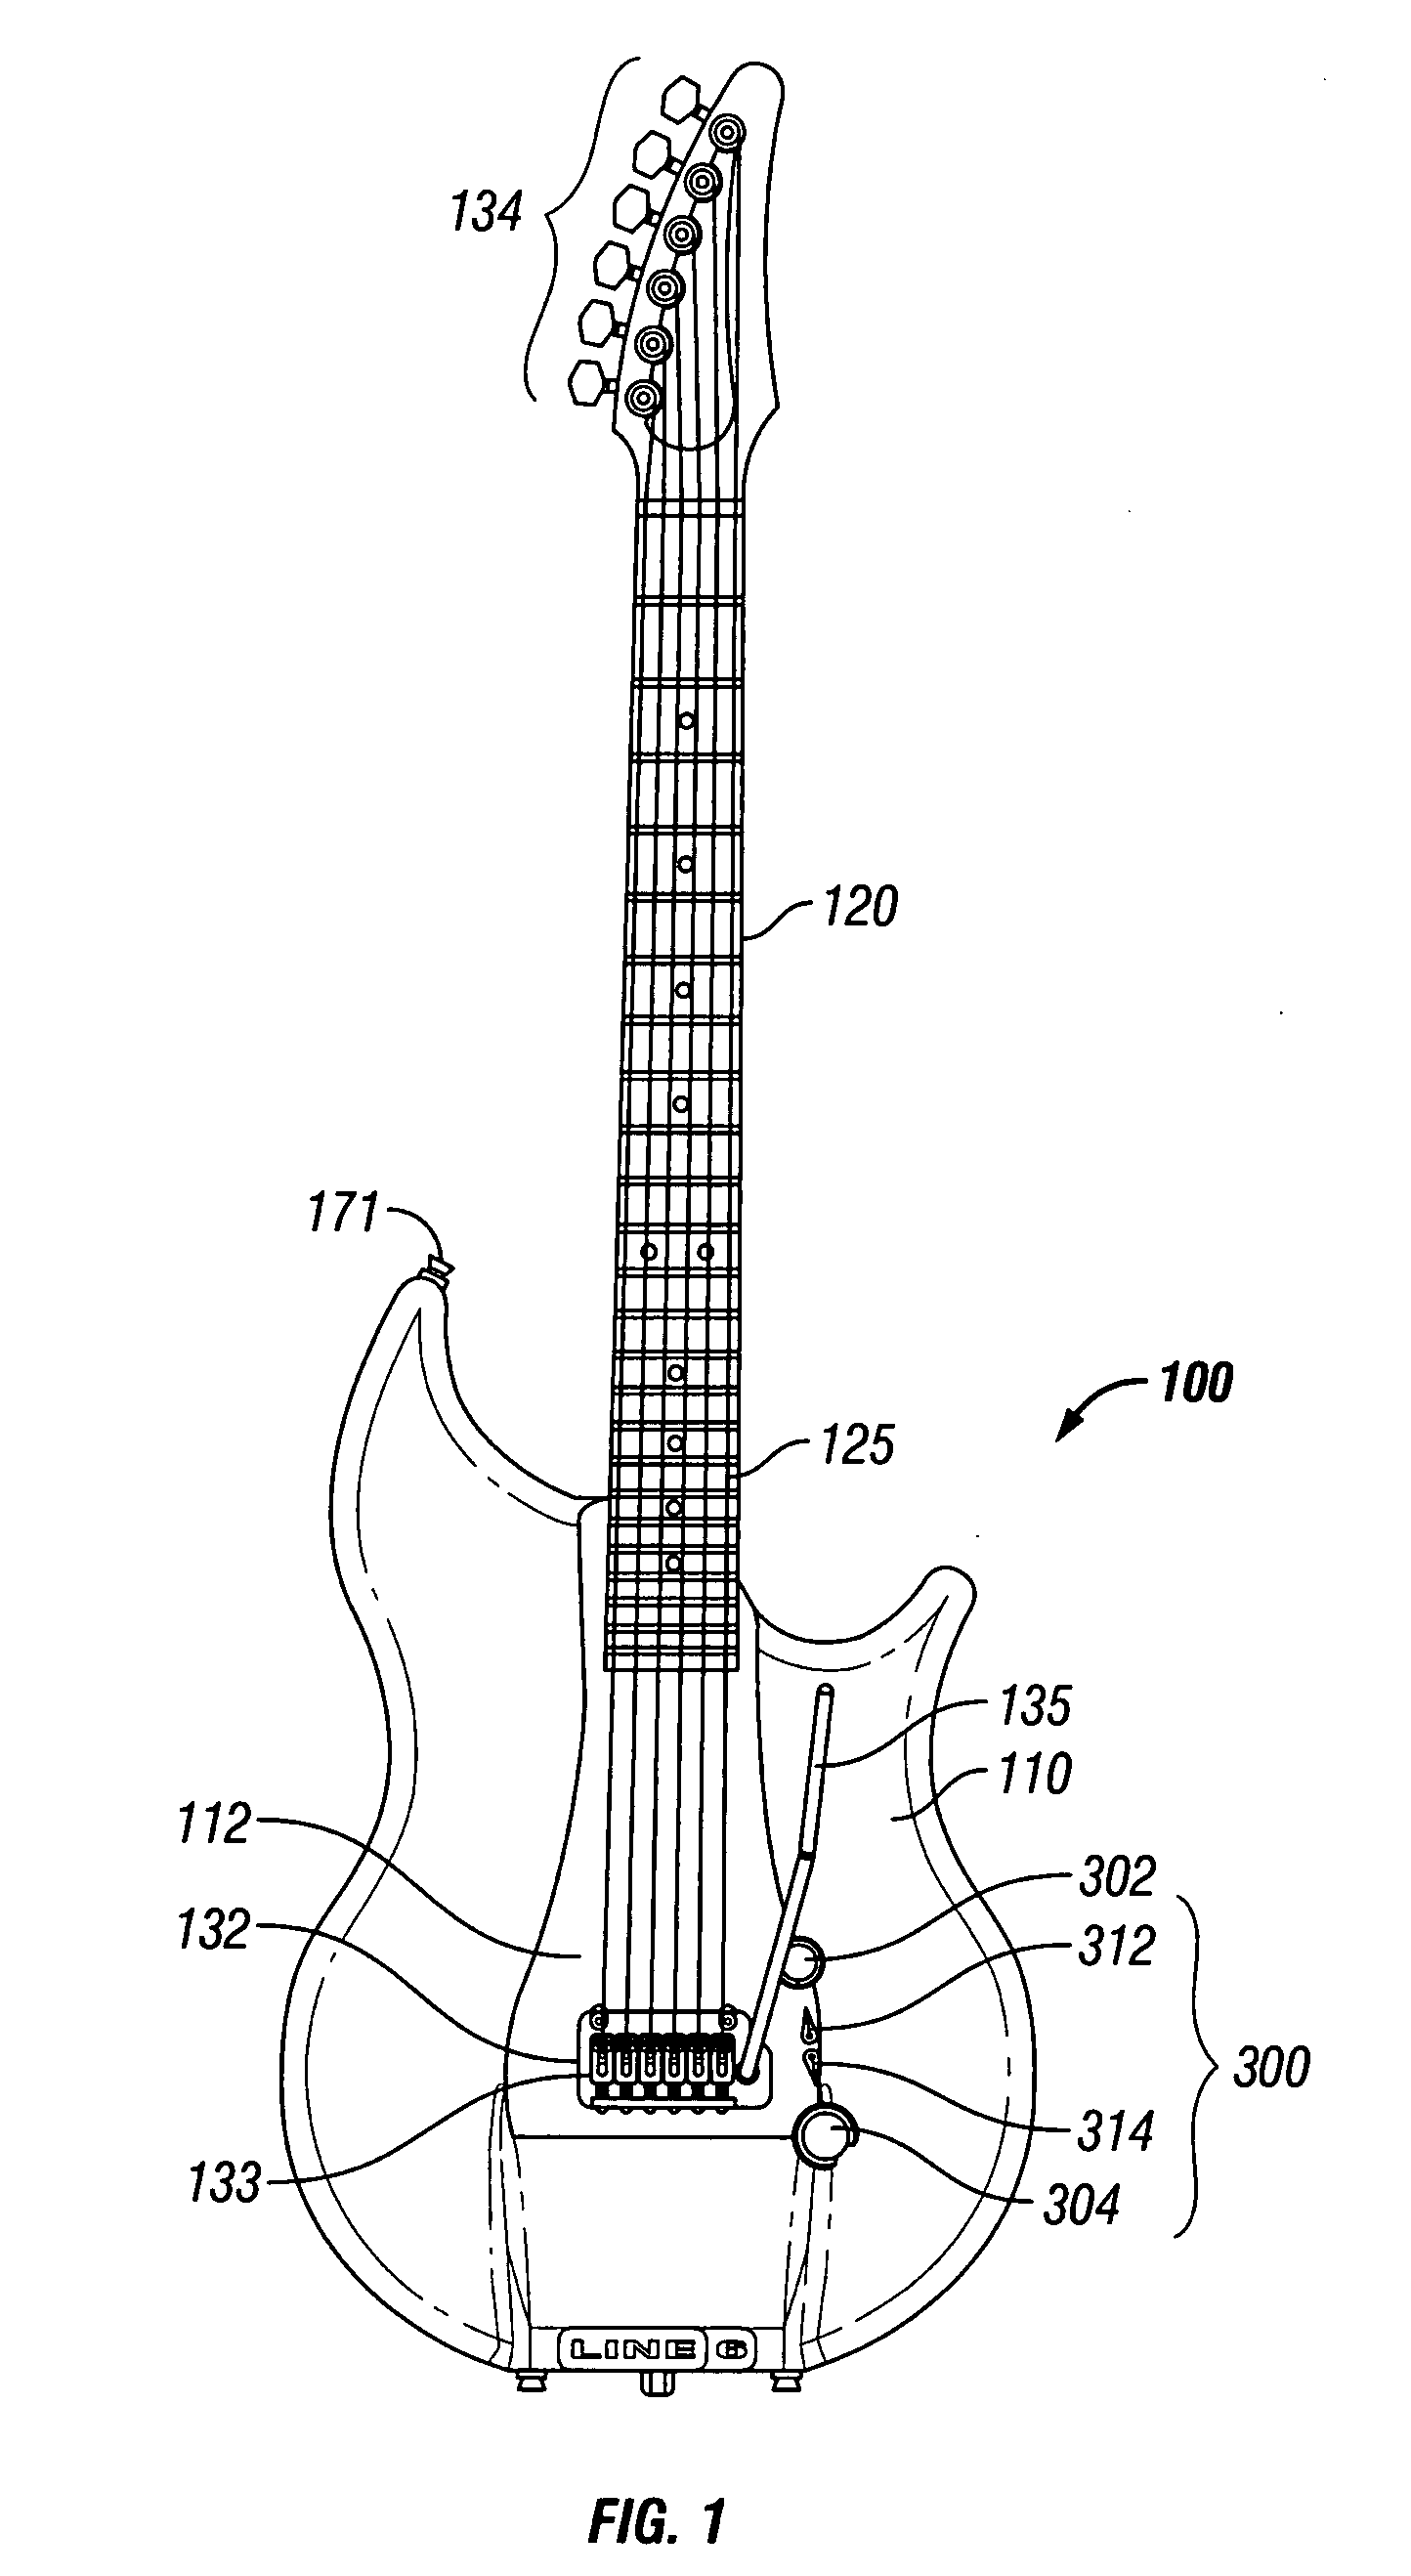 Stringed instrument for connection to a computer to implement DSP modeling